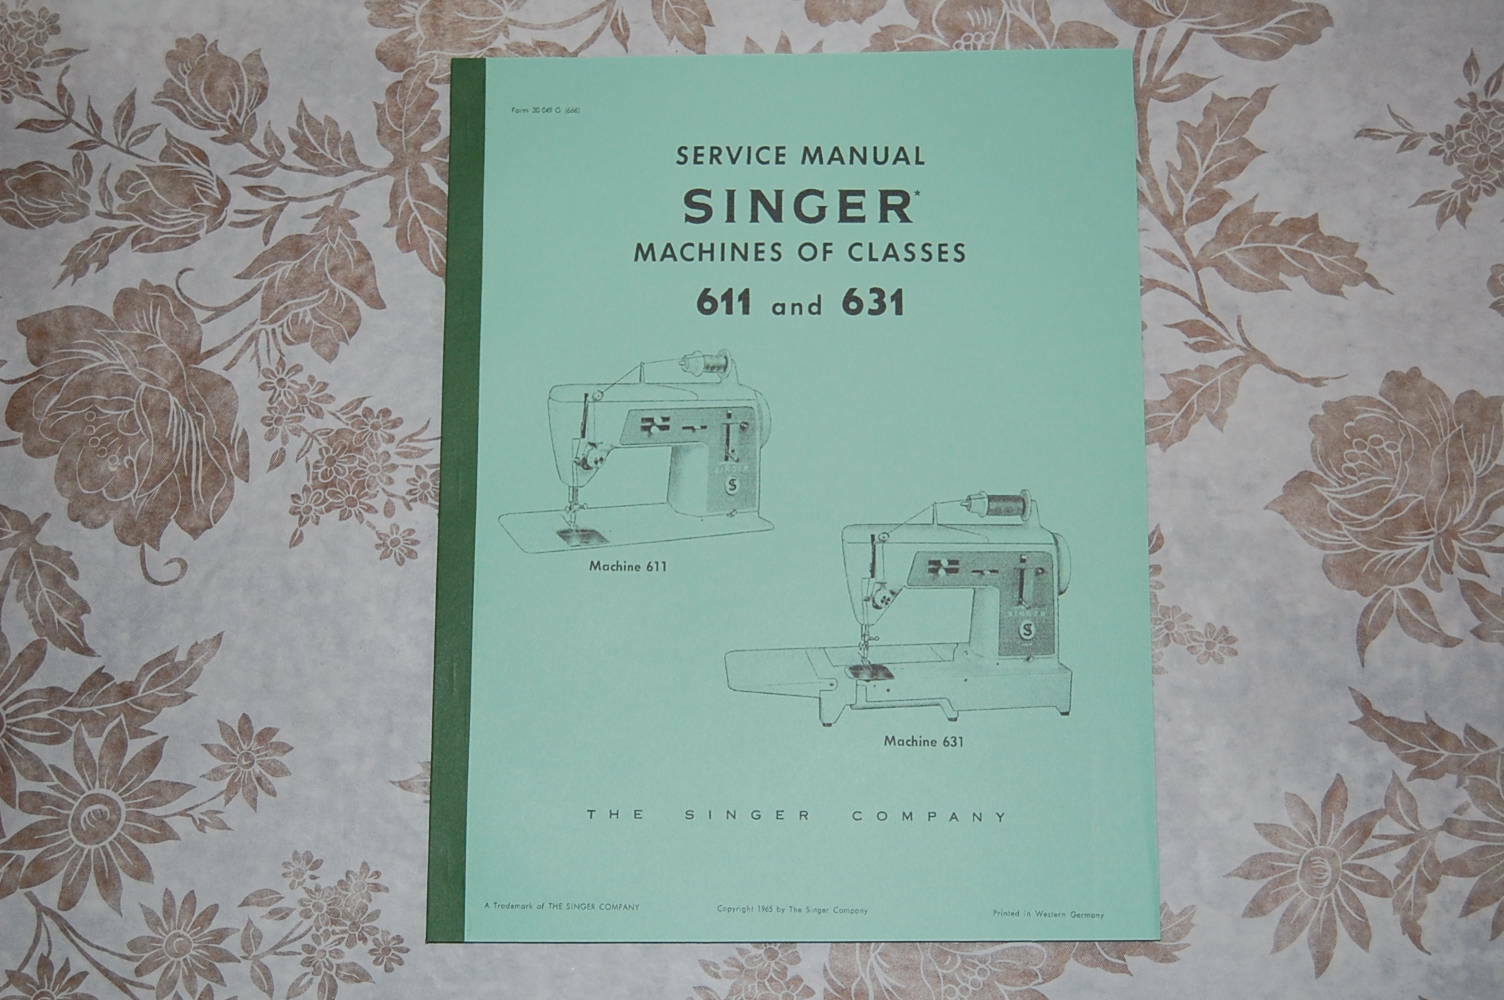 Professional Full Edition Service Manual For Singer 611 And 631 Sewing Machines.